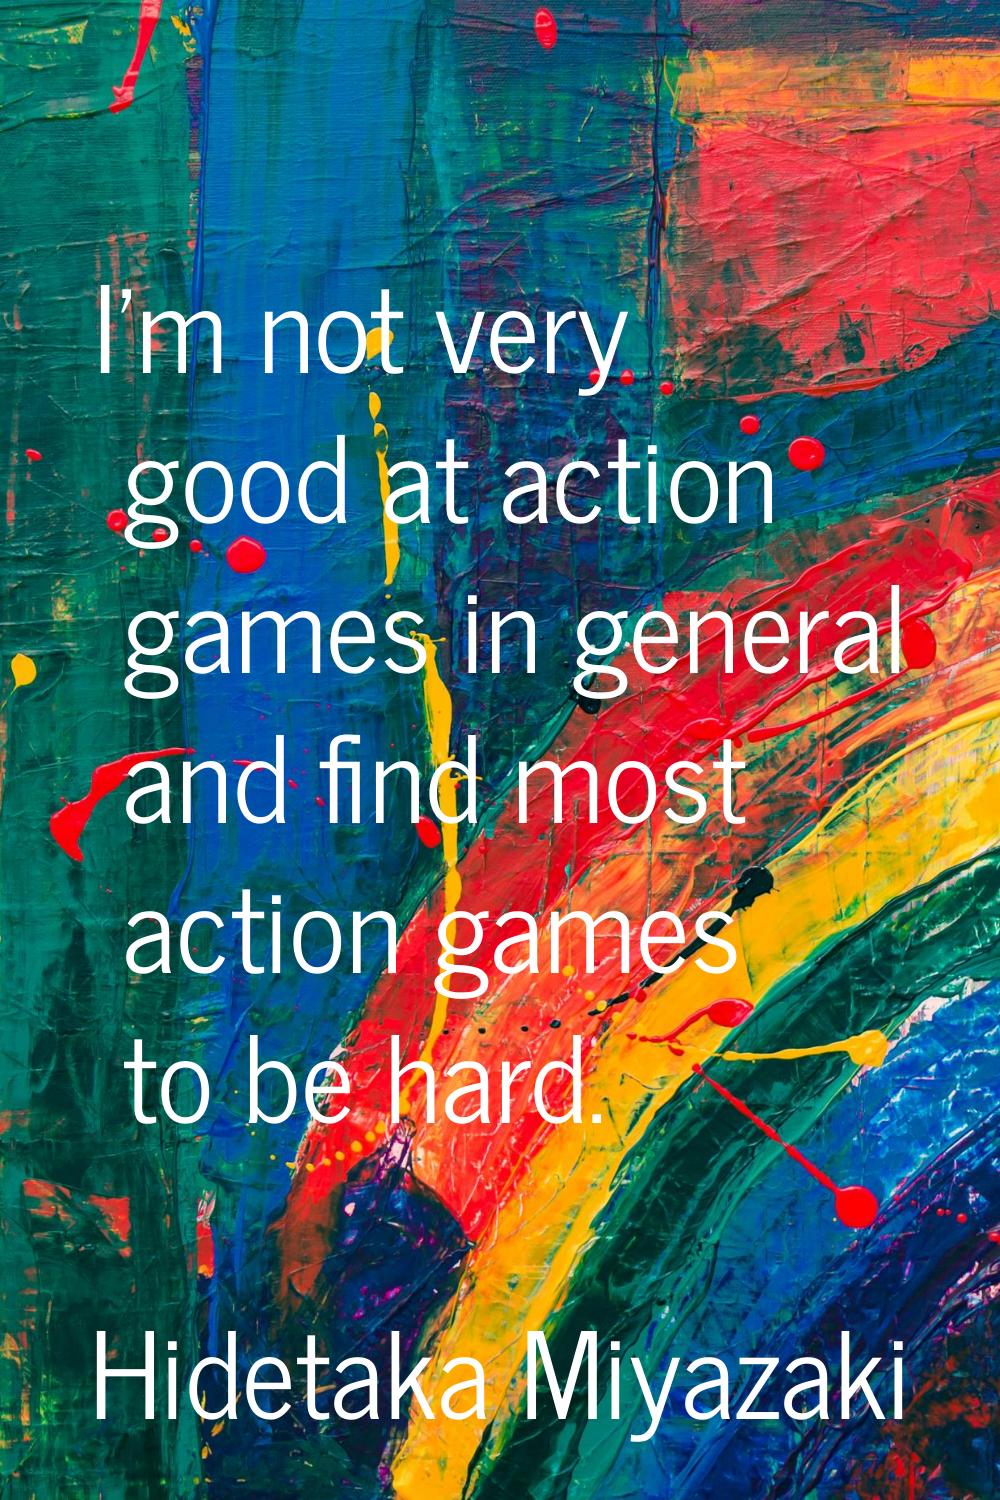 I'm not very good at action games in general and find most action games to be hard.